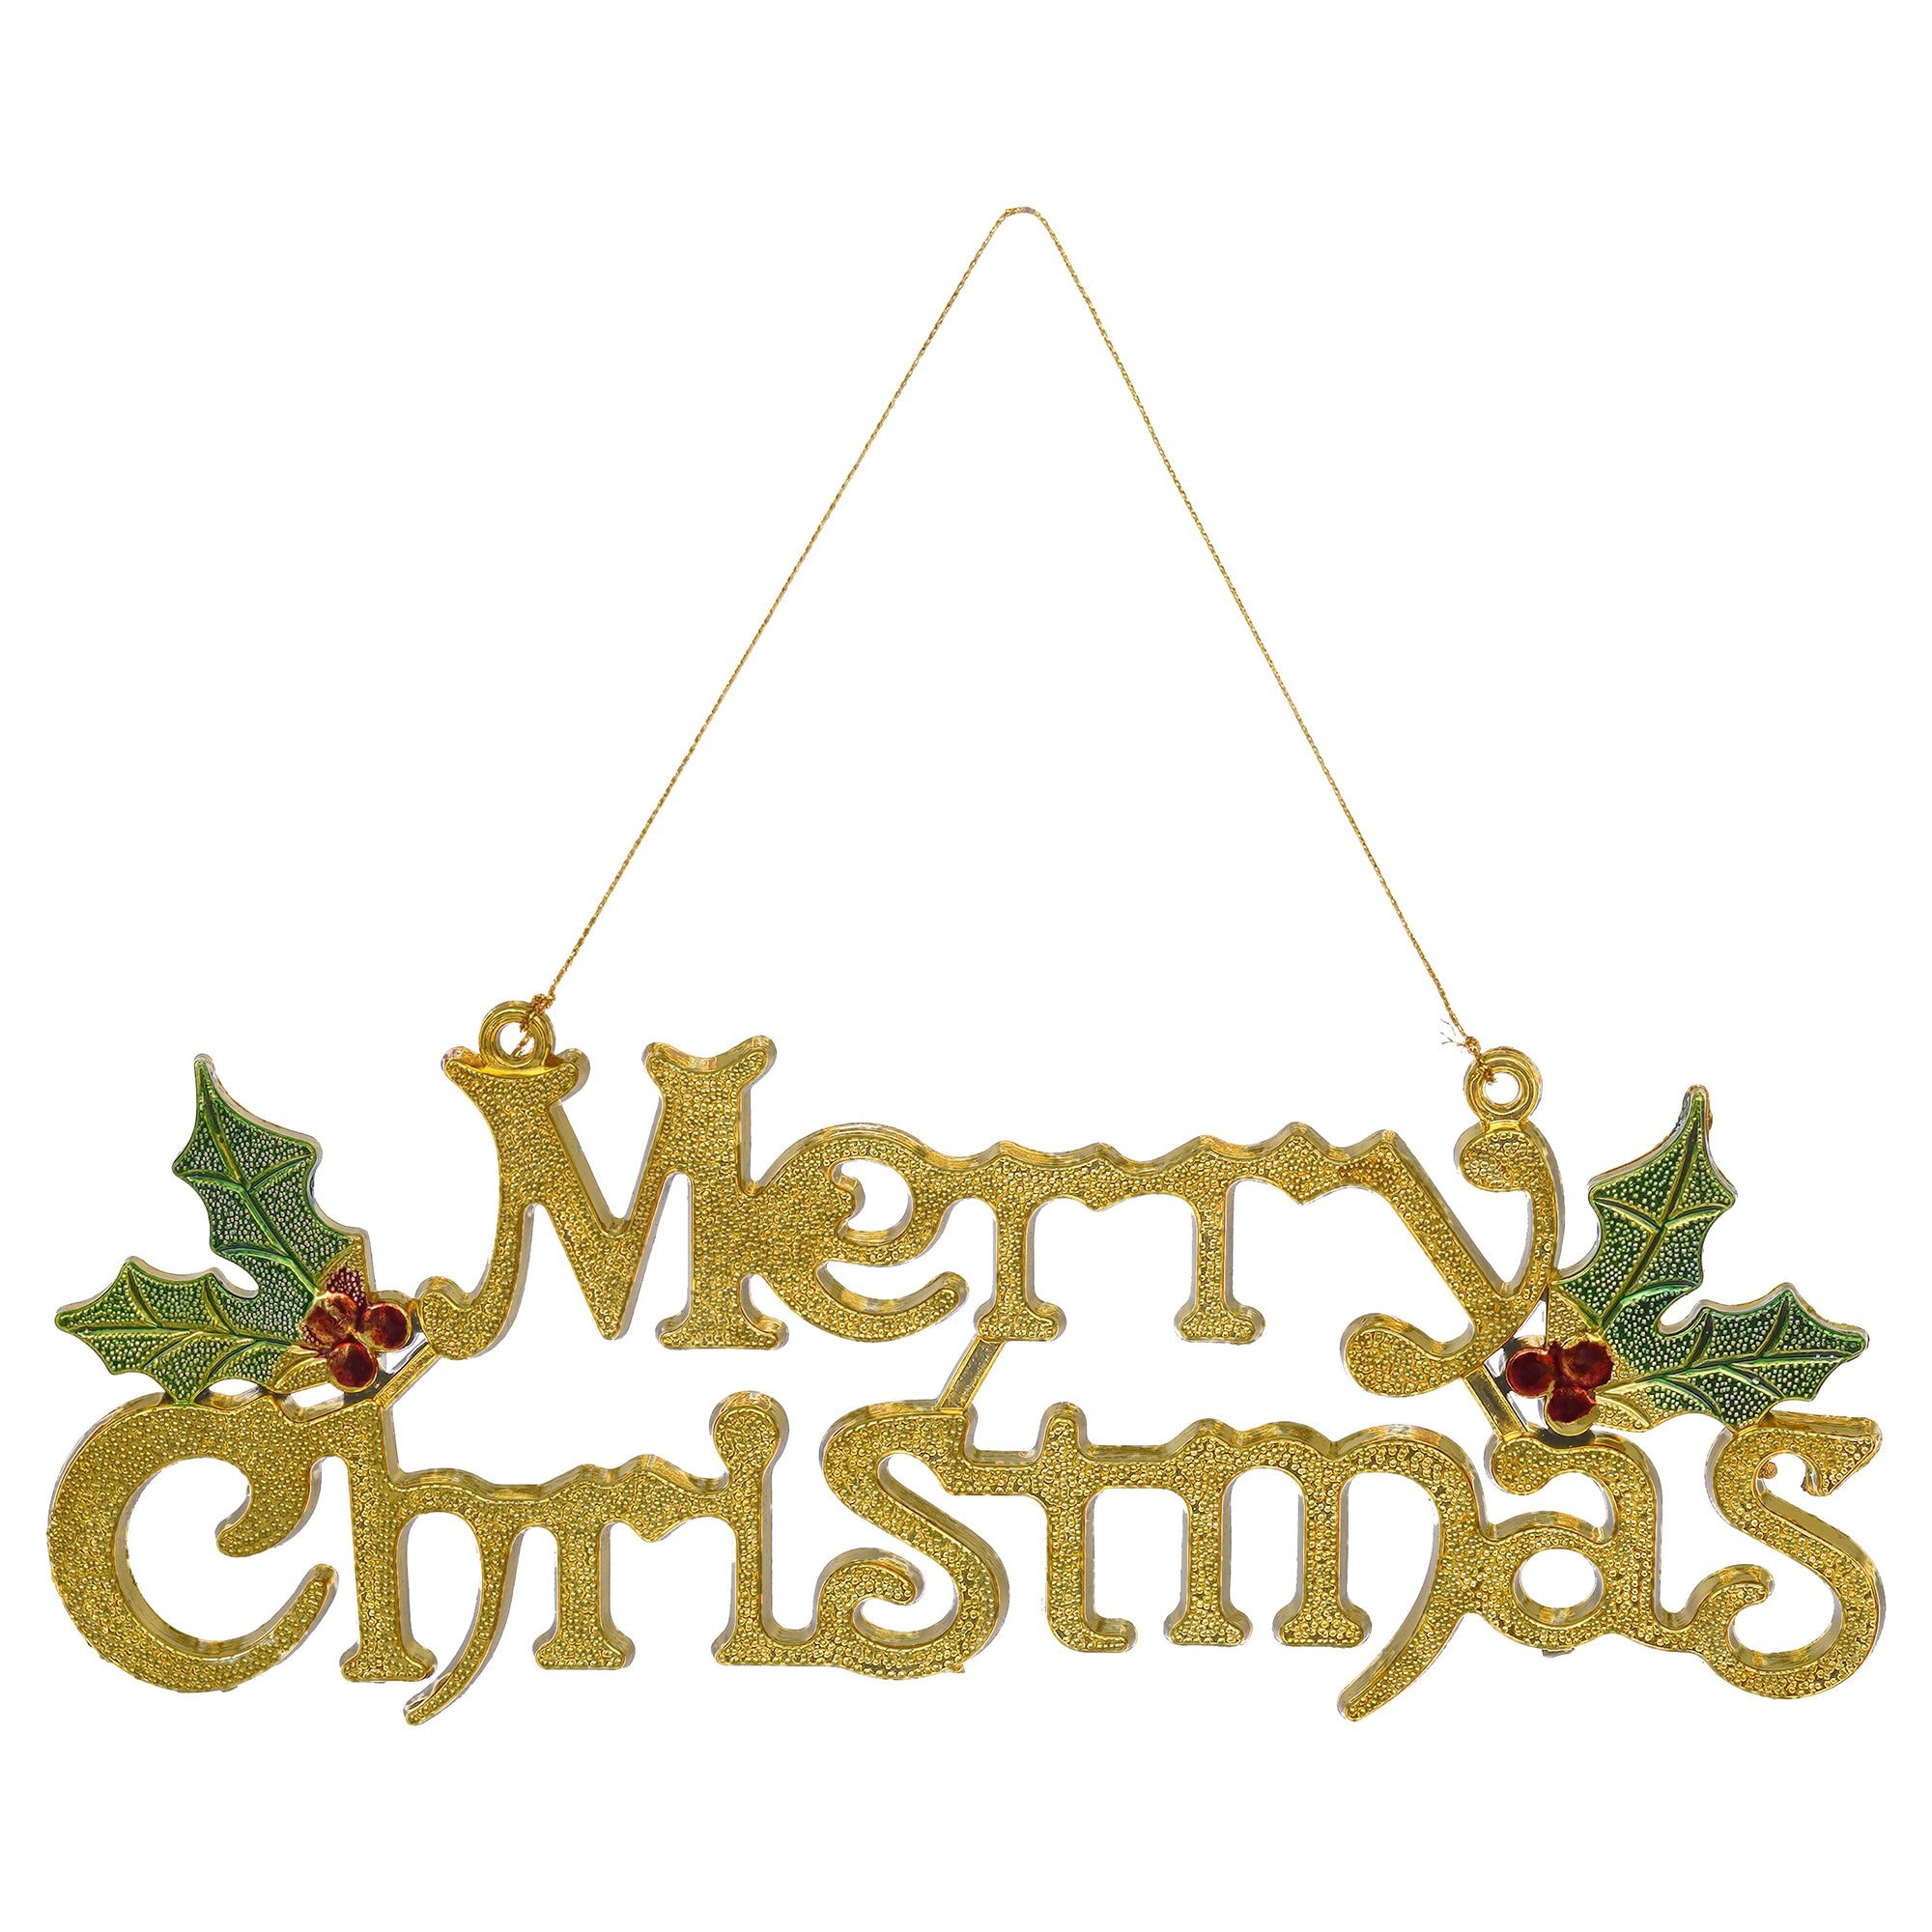 eCraftIndia Green & Gold Merry Christmas Wooden Cutout Wall Hanging Decoration Ornaments Christmas Banner for Home Decor 2